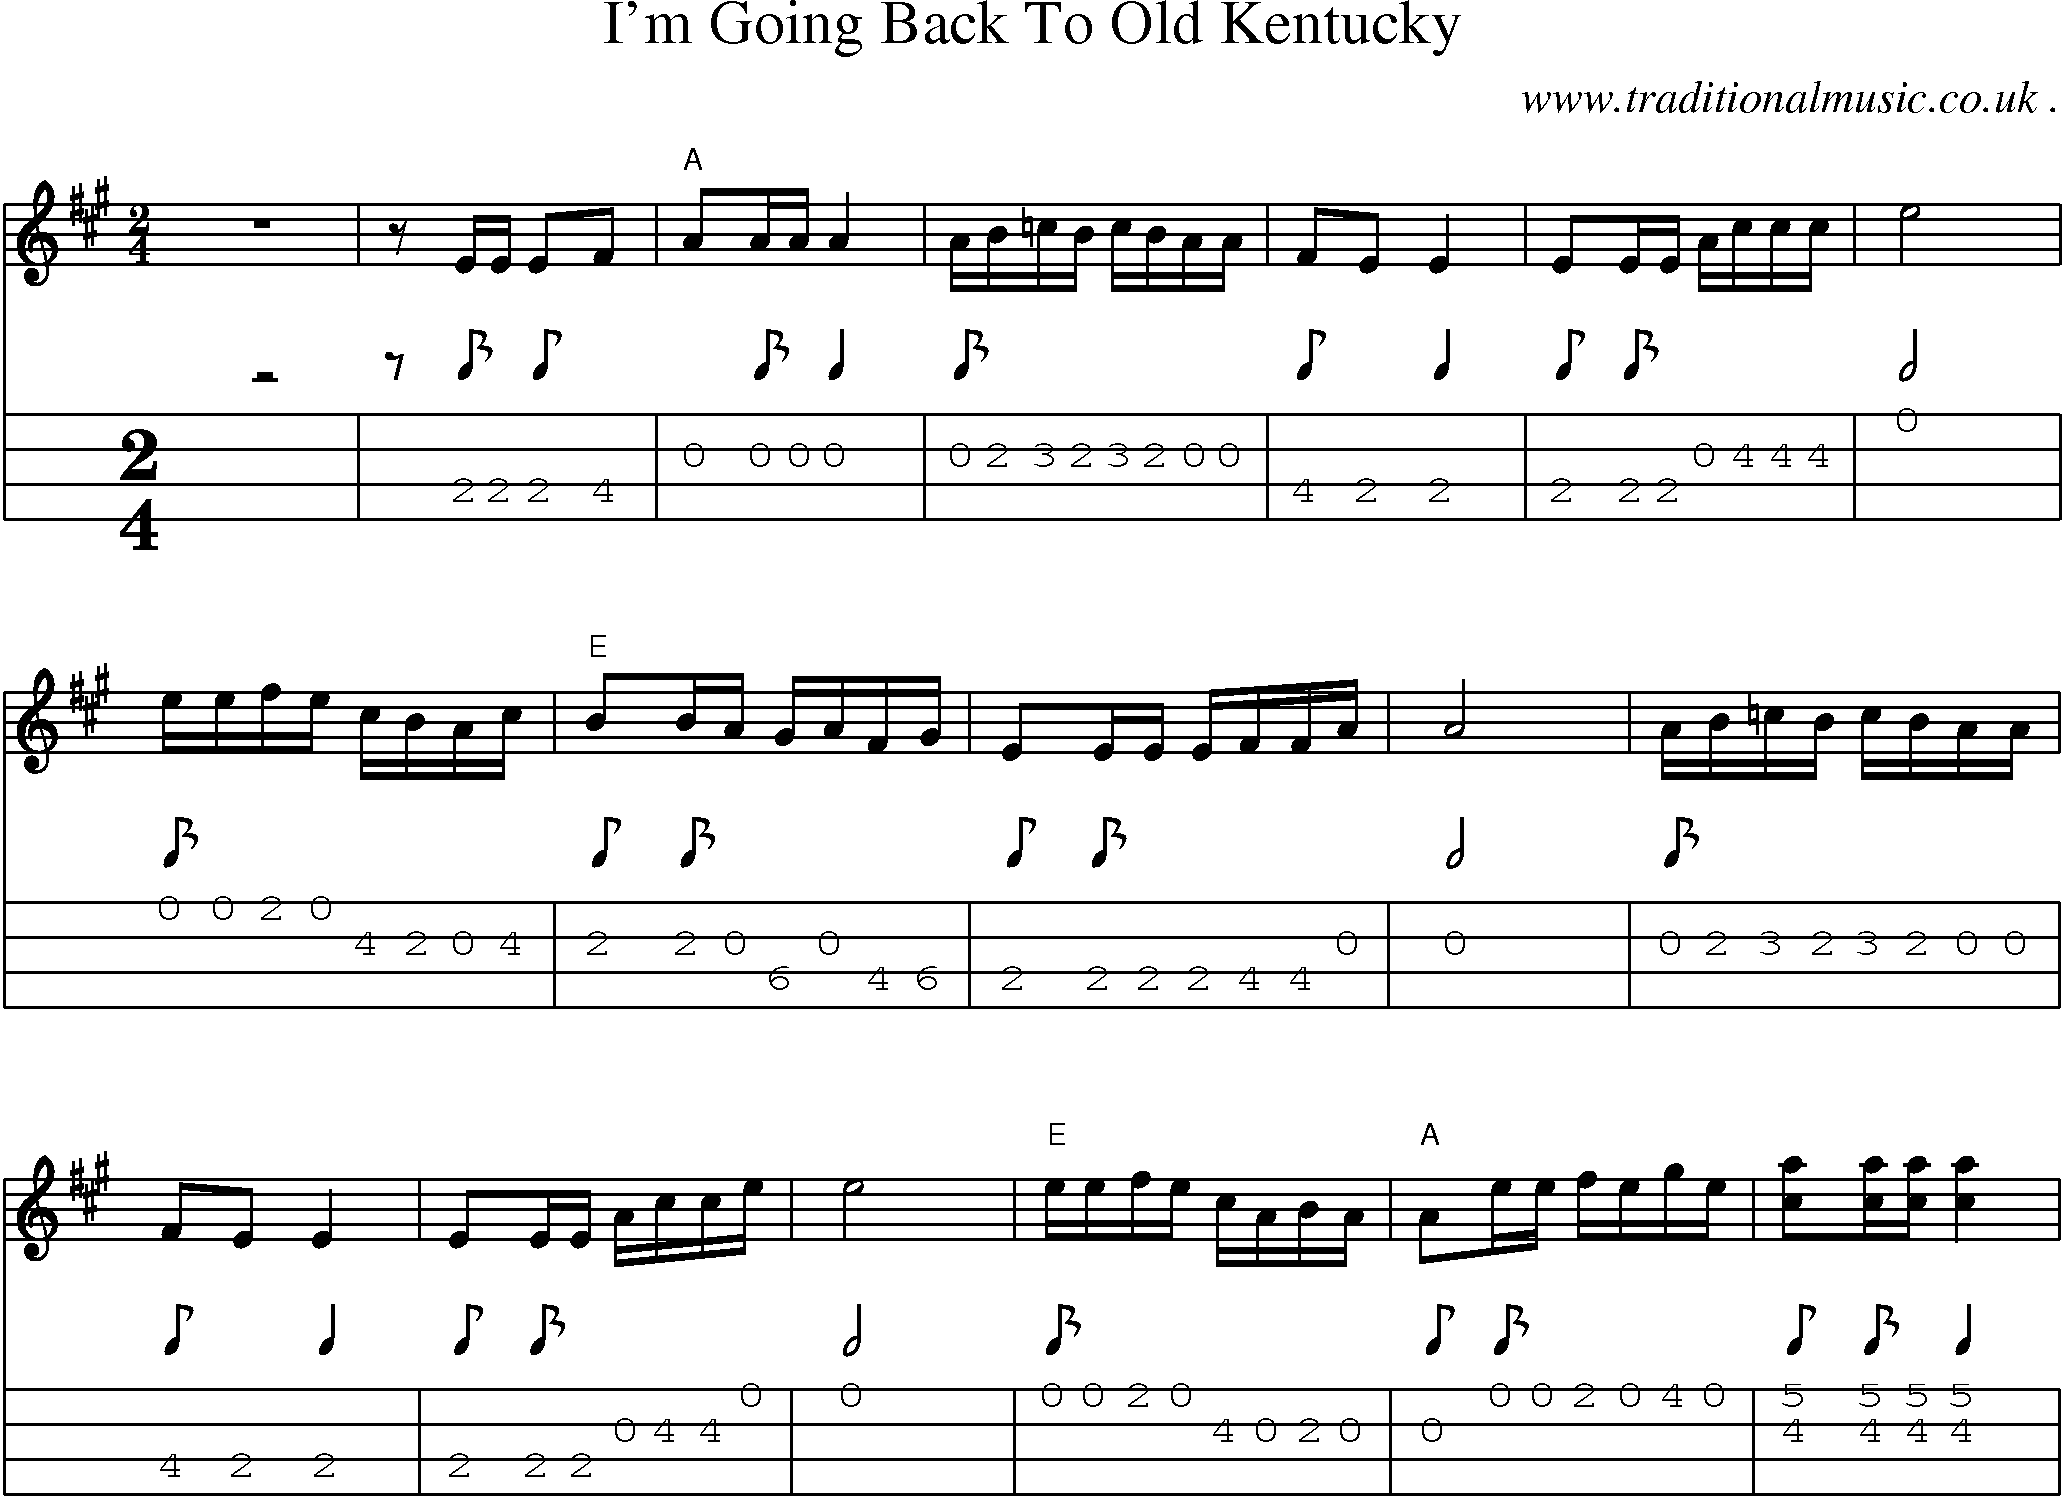 Music Score and Mandolin Tabs for Im Going Back To Old Kentucky